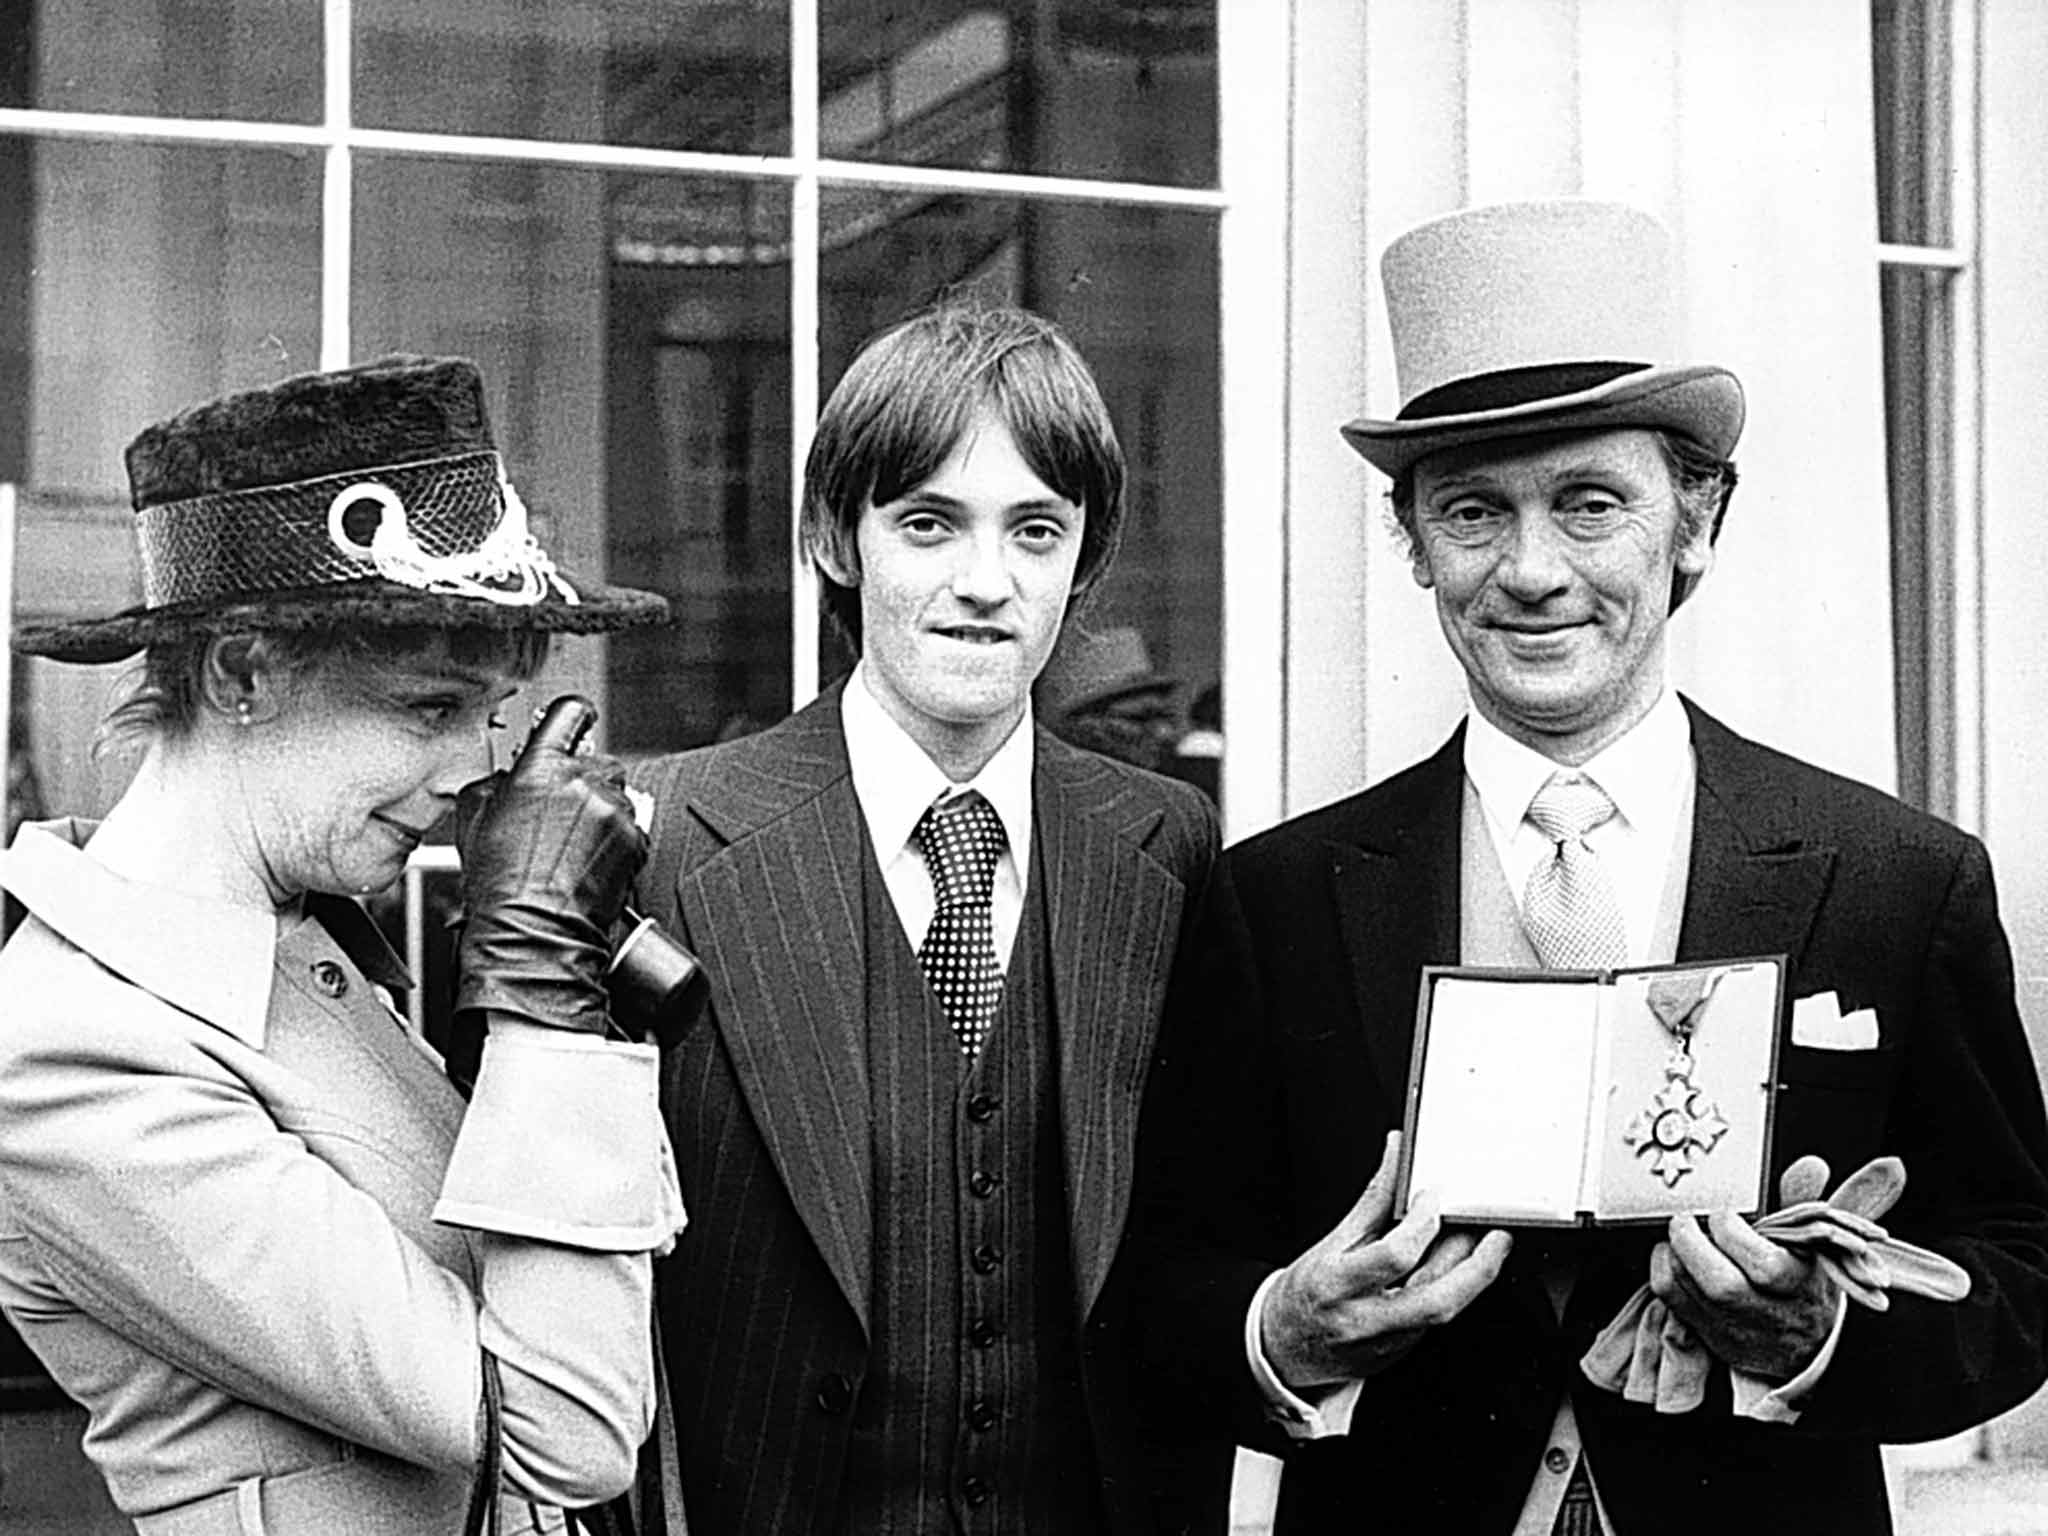 Pasco with his wife and son at Buckingham Palace in 1977 after receiving his CBE